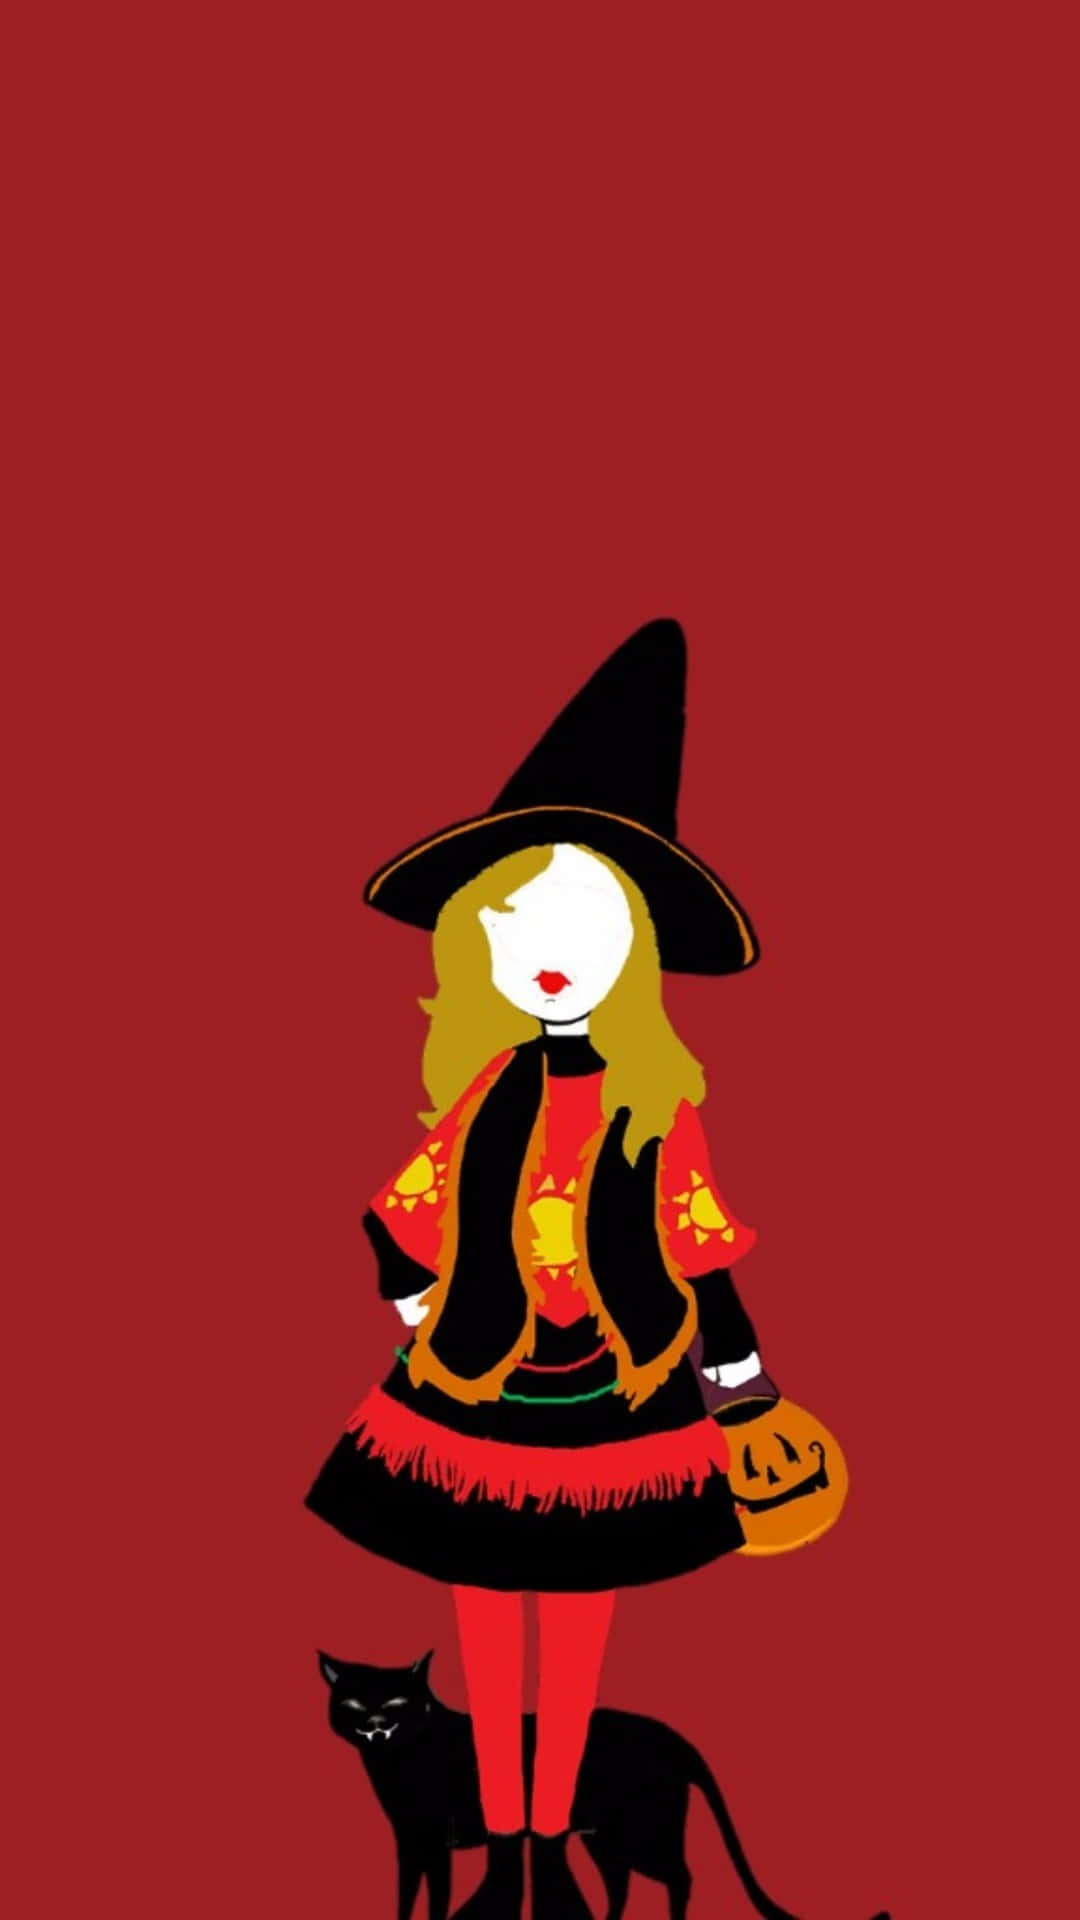 Get Ready to Cast a Spell with Hocus Pocus on your iPhone Wallpaper